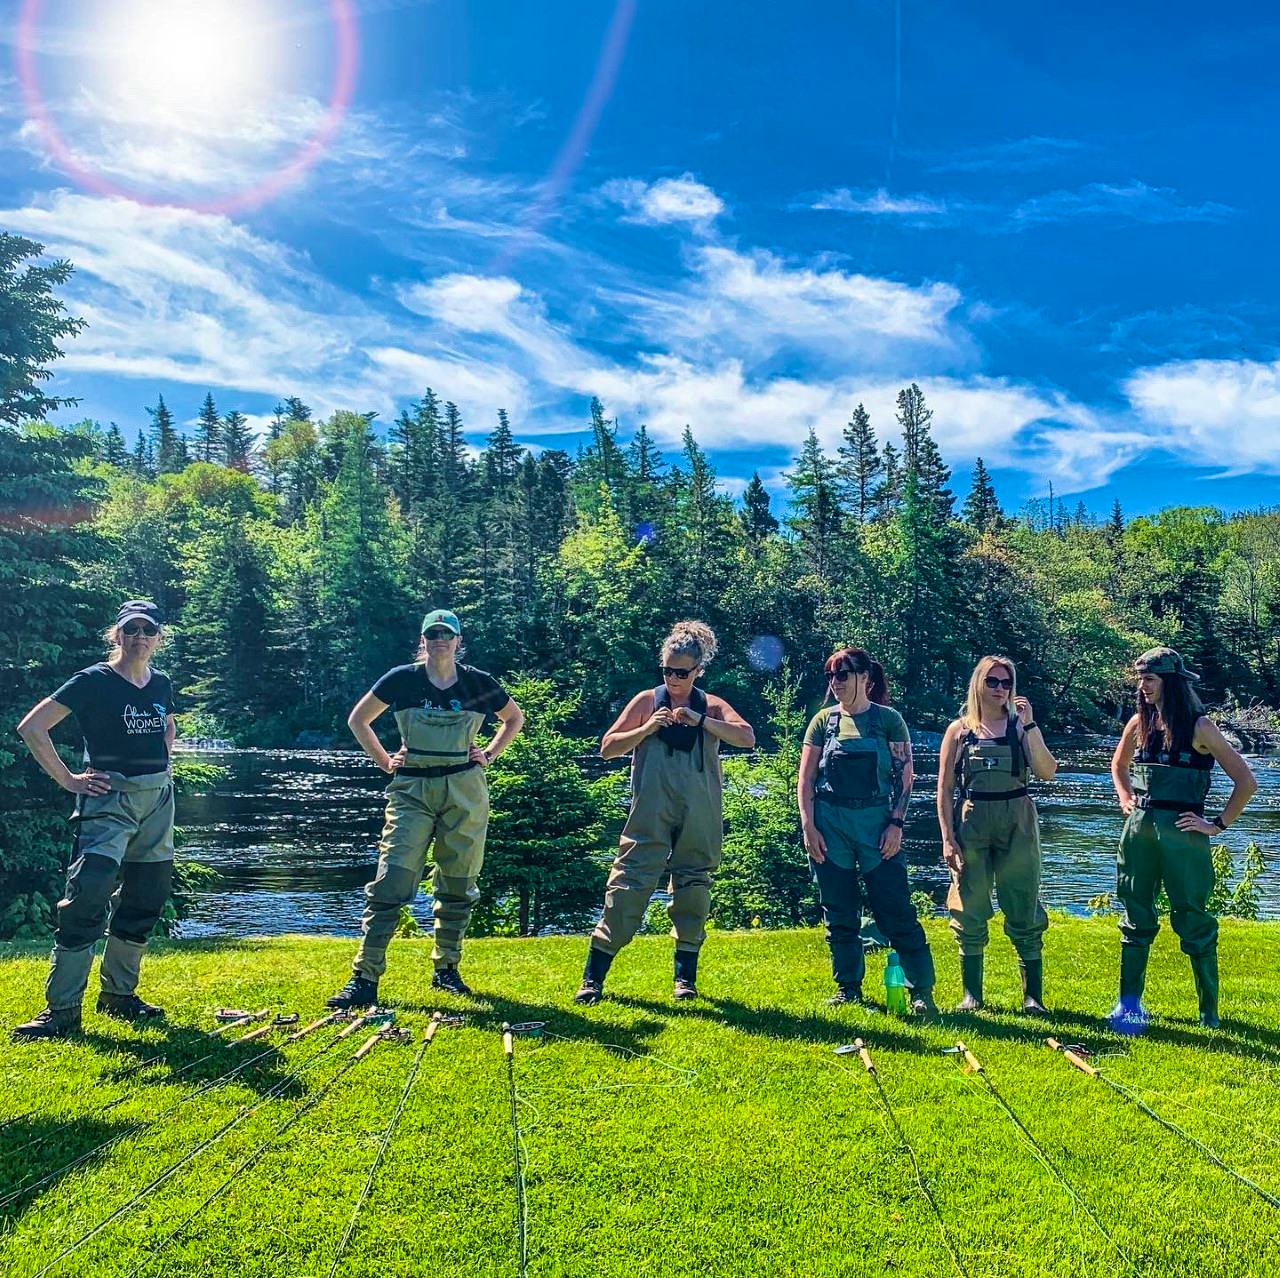 Fly fishing retreat for women grows to Atlantic-wide empowering